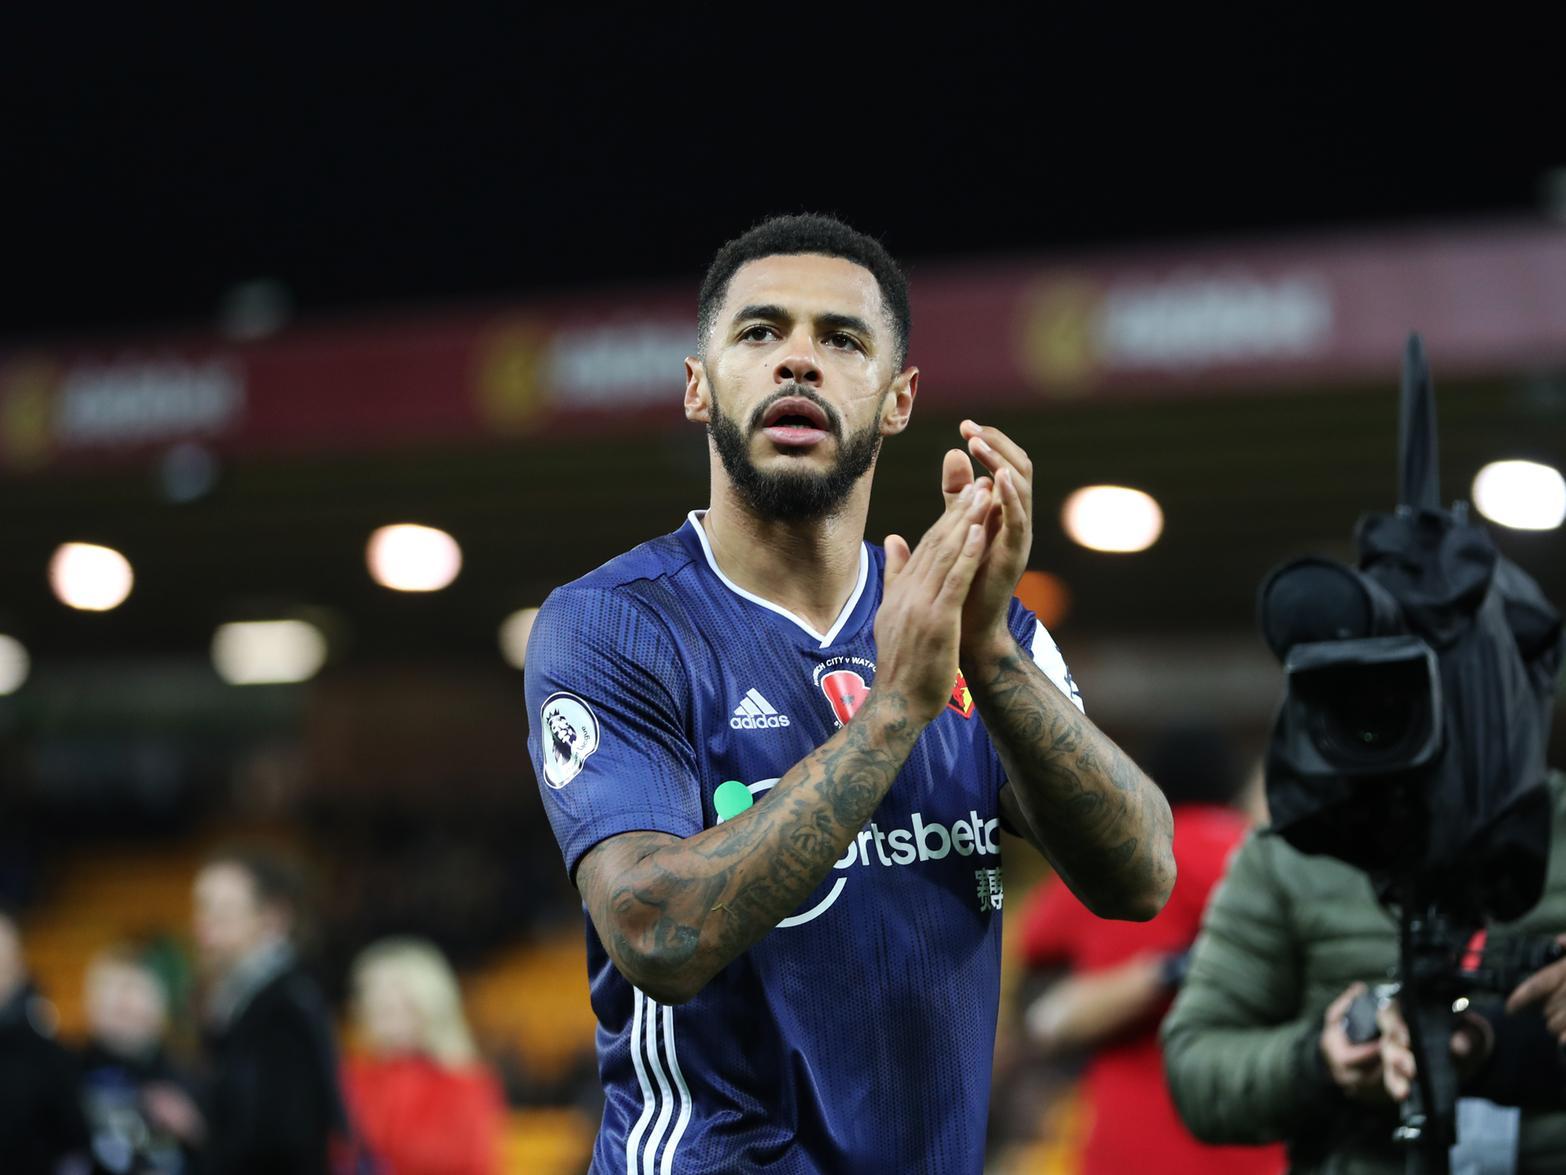 The bookies have responded to recent transfer speculation by slashing the club's odds of signing Watford's Andre Gray on loan, with the Whites now priced at an odds on, 1/4 favourites to seal the deal. (Sky Bet)